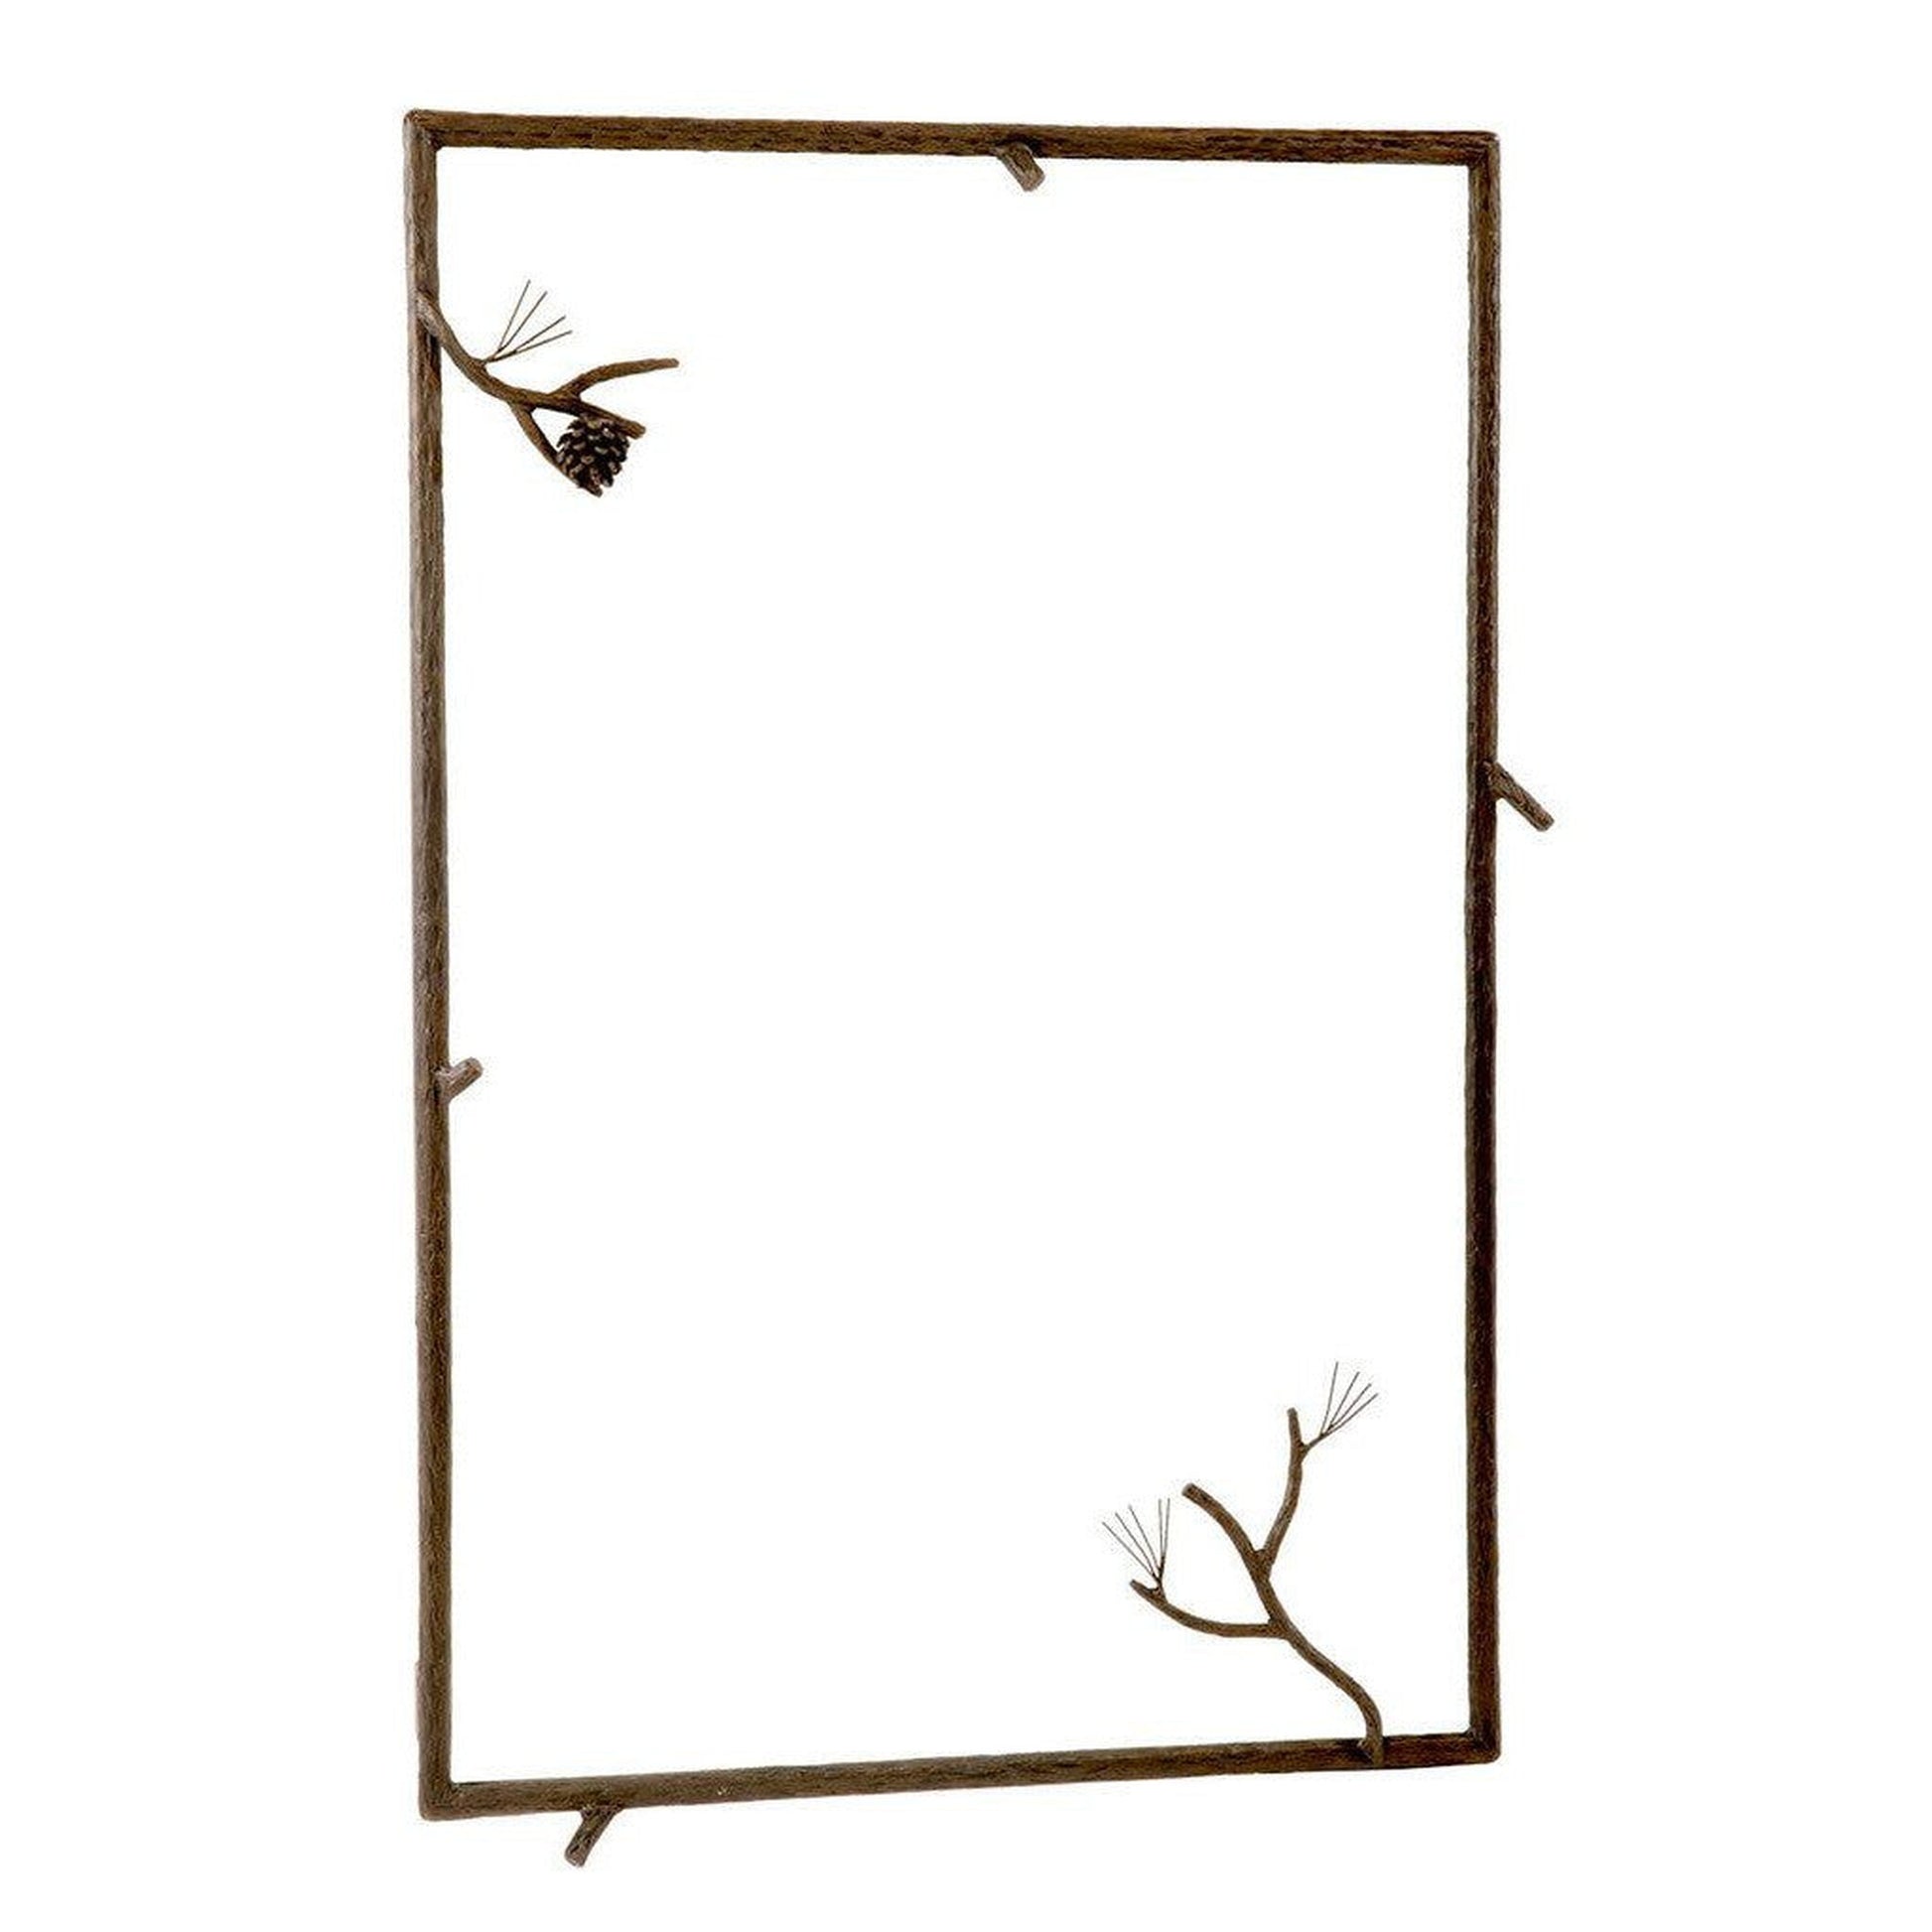 Stone County Ironworks Pine 37" x 25" Large Hand Rubbed Pewter Iron Wall Mirror With Copper Iron Accent